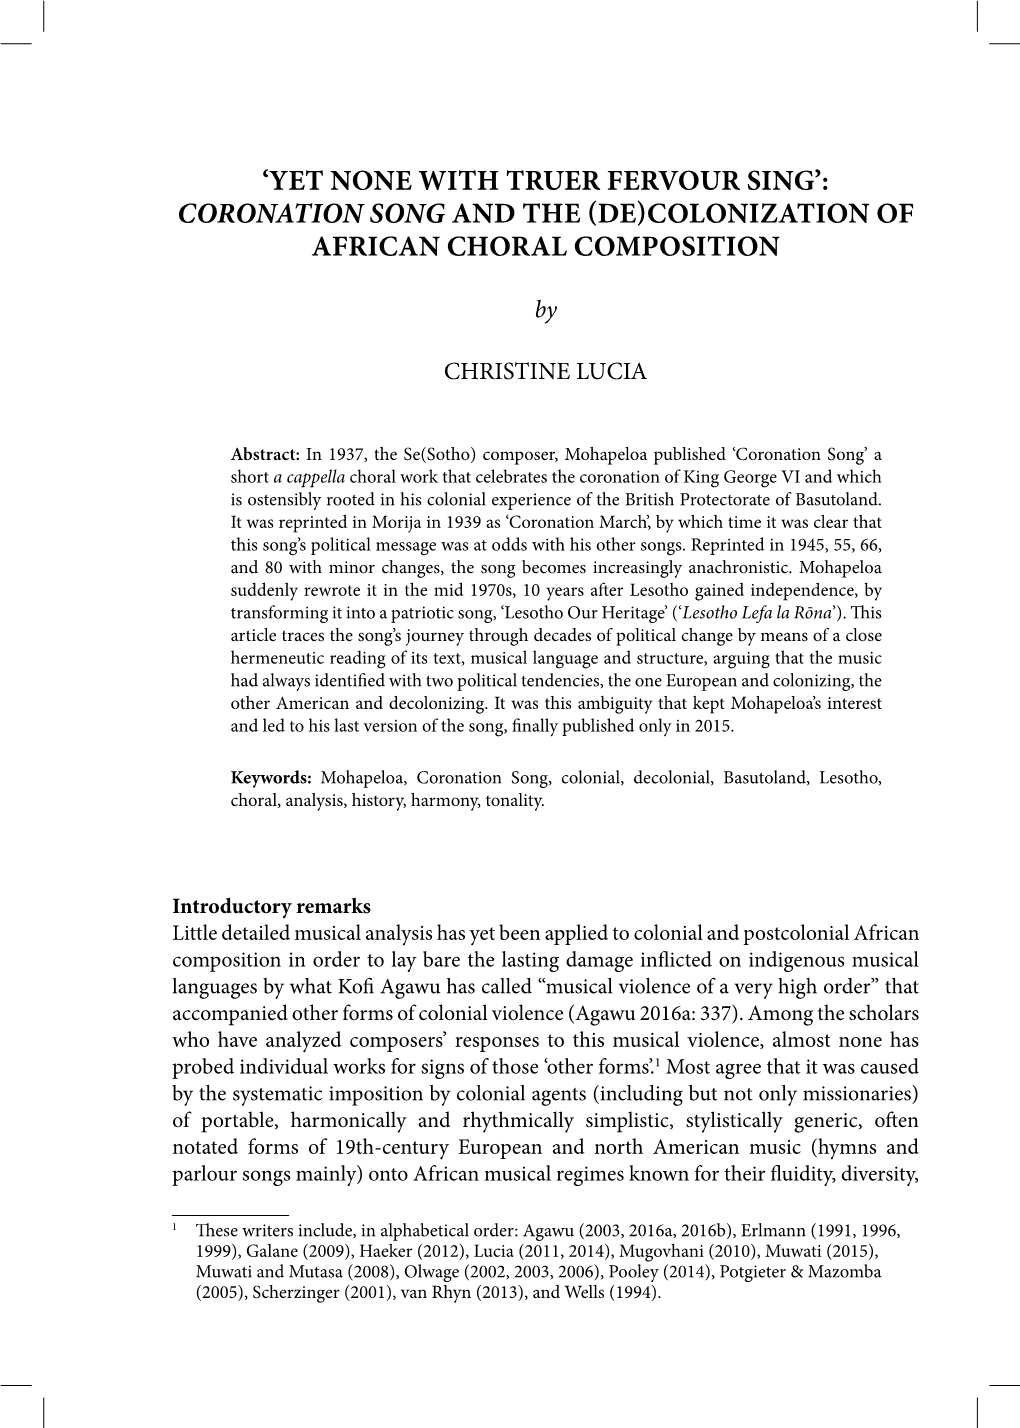 Yet None with Truer Fervour Sing’: Coronation Song and the (De)Colonization of African Choral Composition